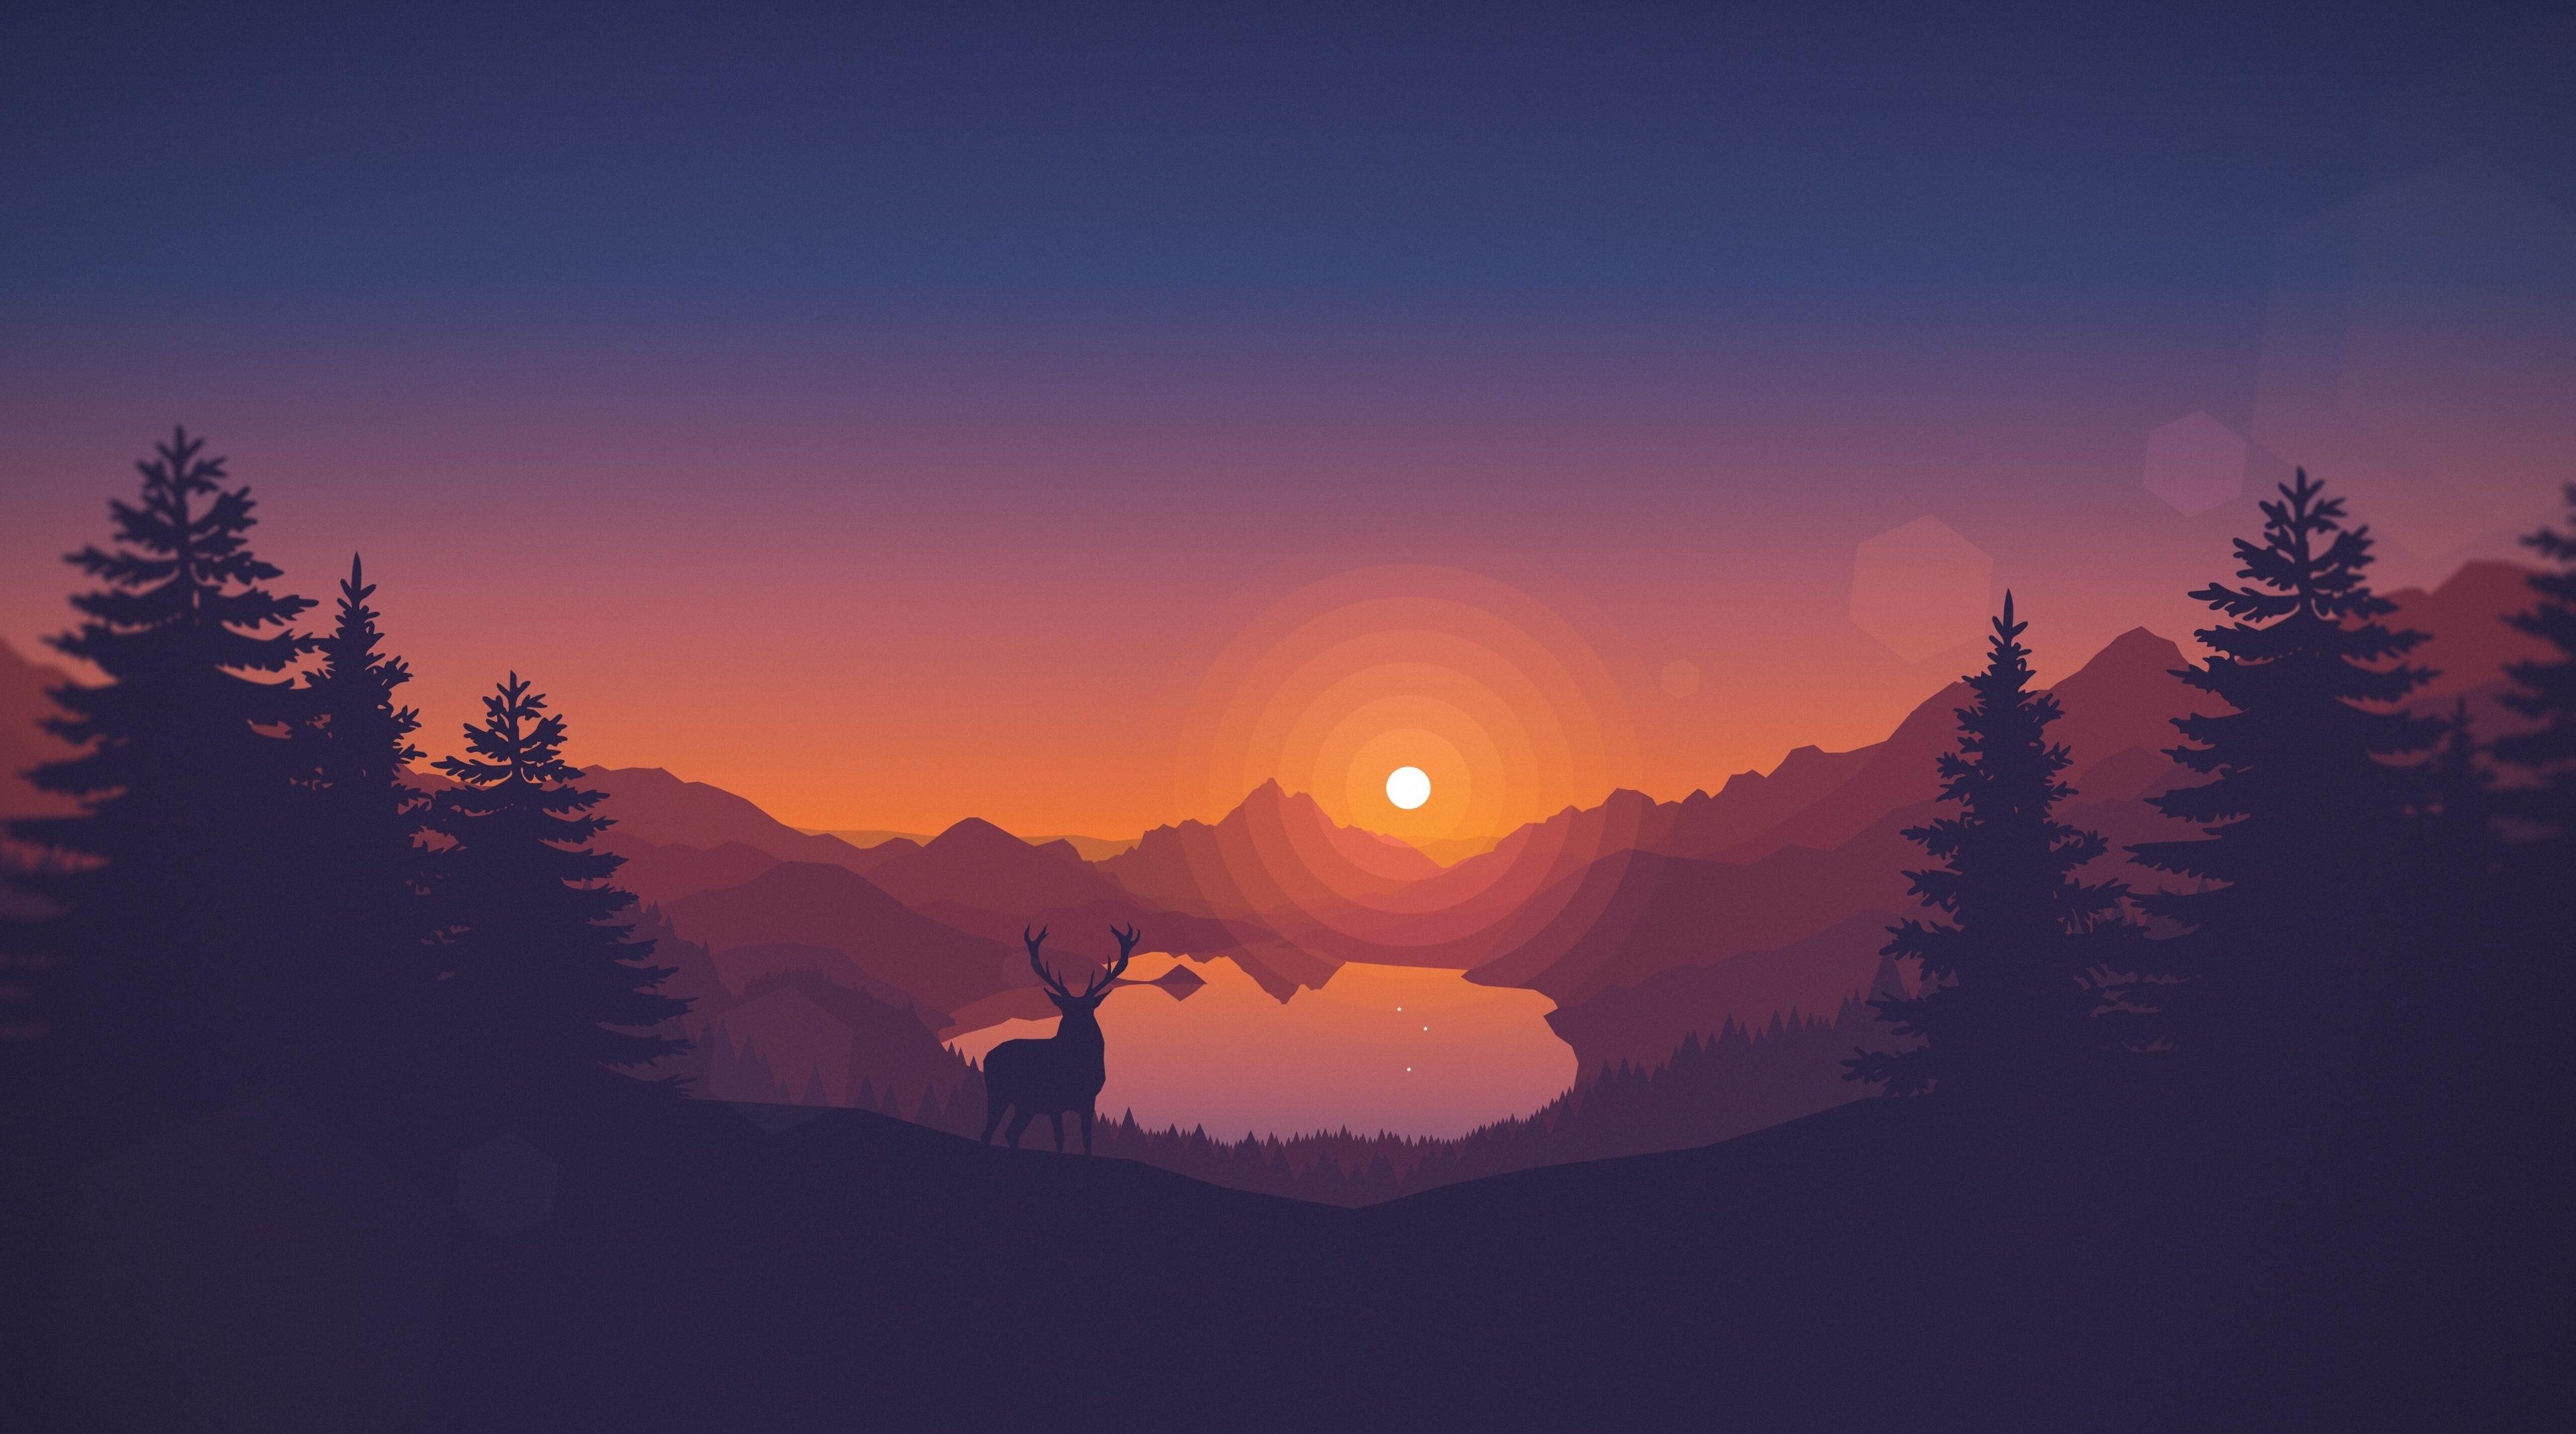 Free Download 3840x2138 Firewatch 4k Desktop Wallpaper Cool Photography In 3840x2138 For Your Desktop Mobile Tablet Explore 53 4k Pc Wallpapers 4k Pc Wallpapers 4k Wallpaper For Pc Retro